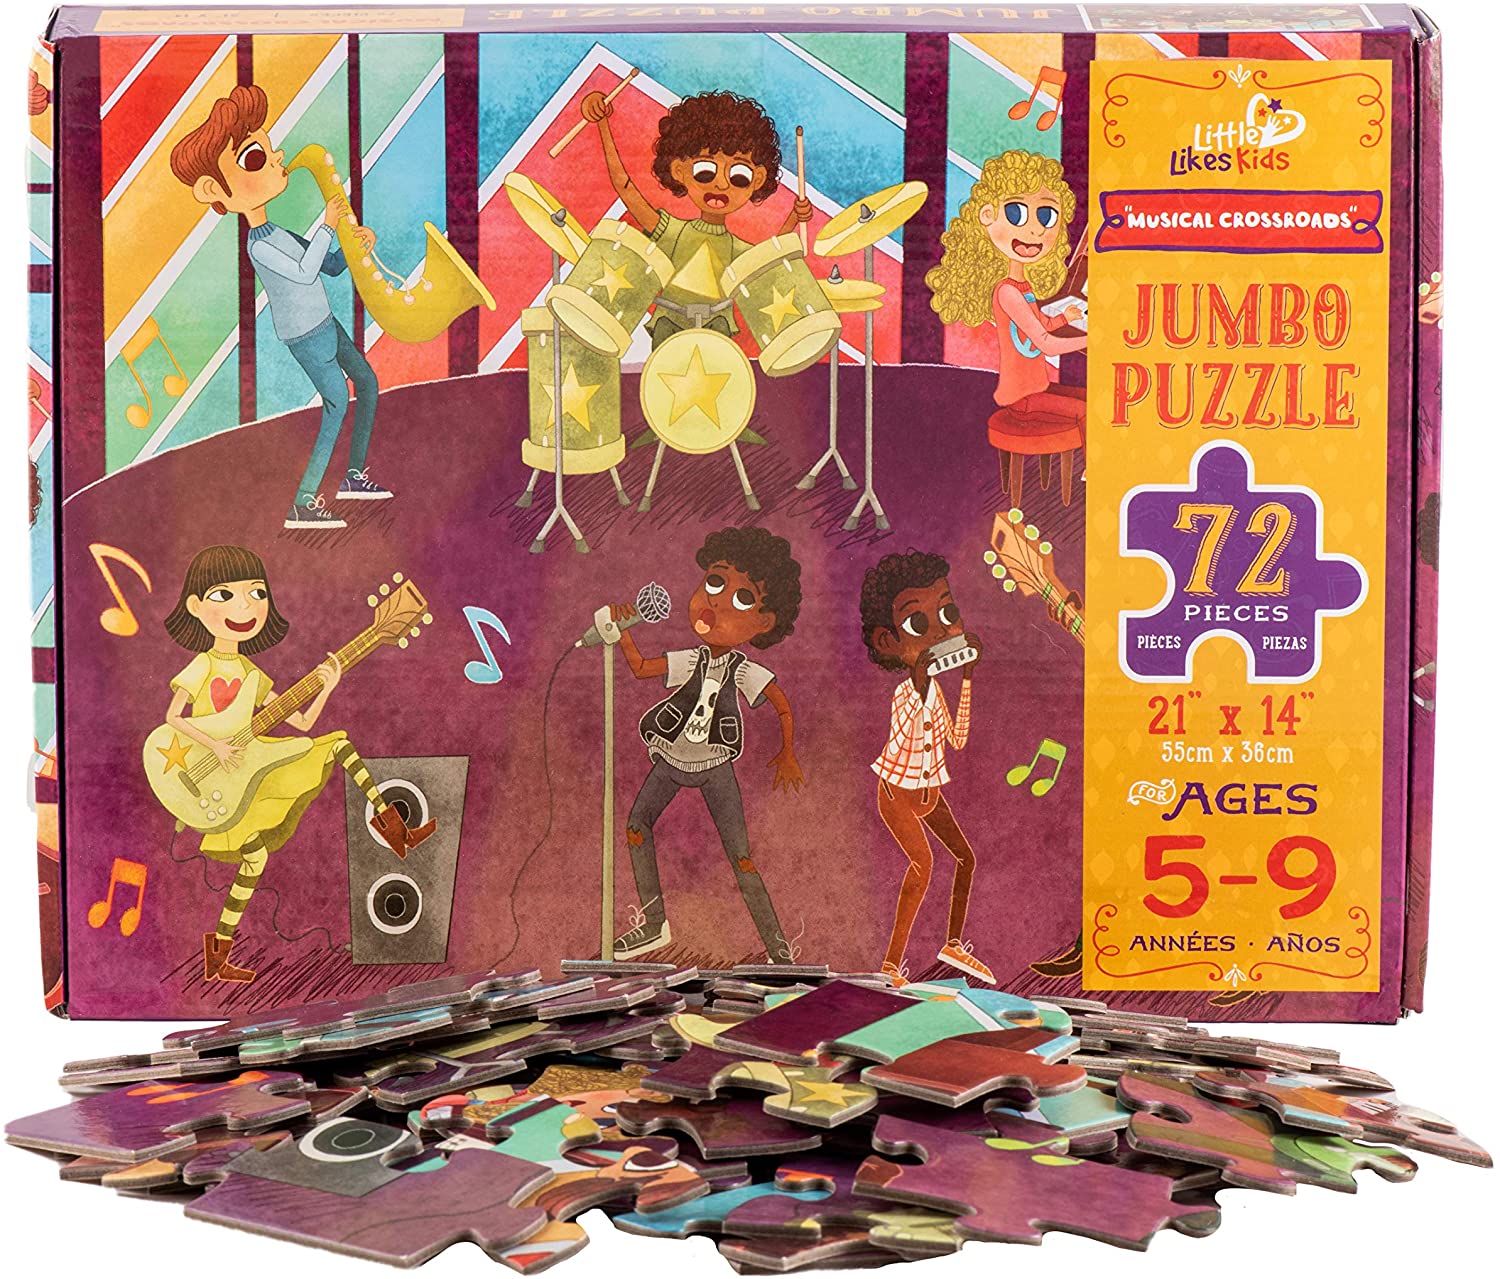 Image of Musical Crossroads Puzzle Box with pieces